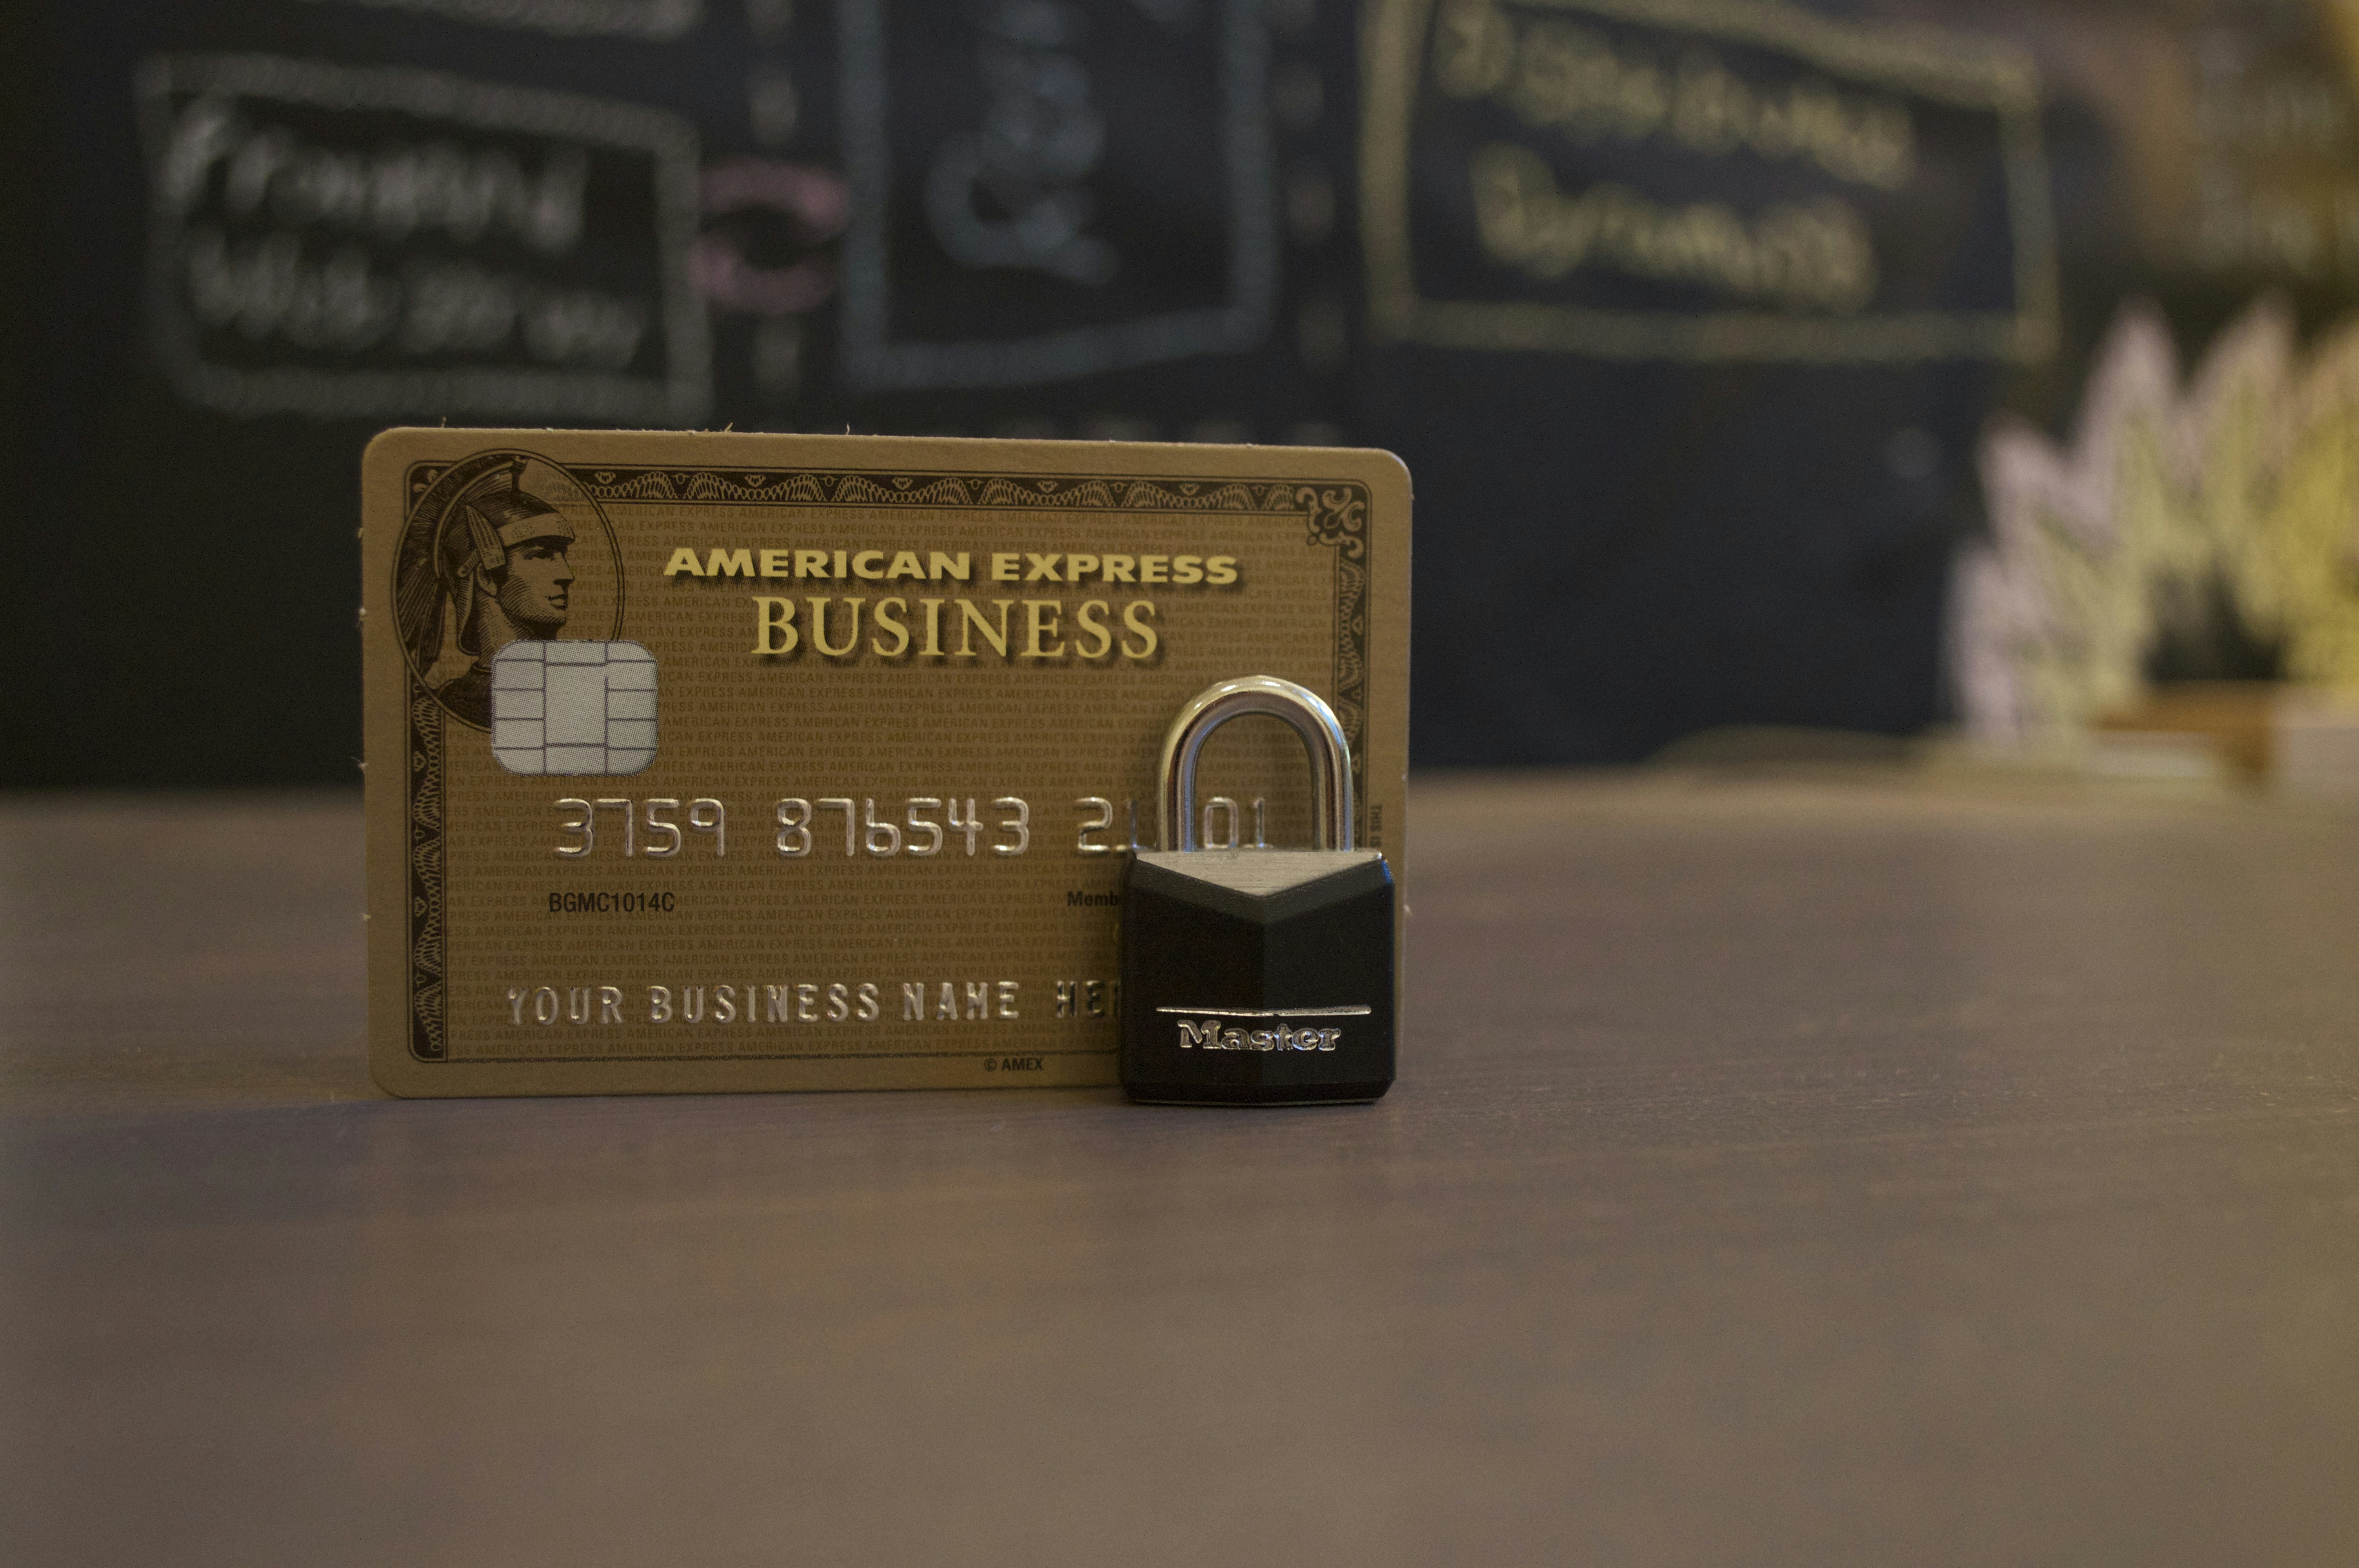 AMEX business credit card